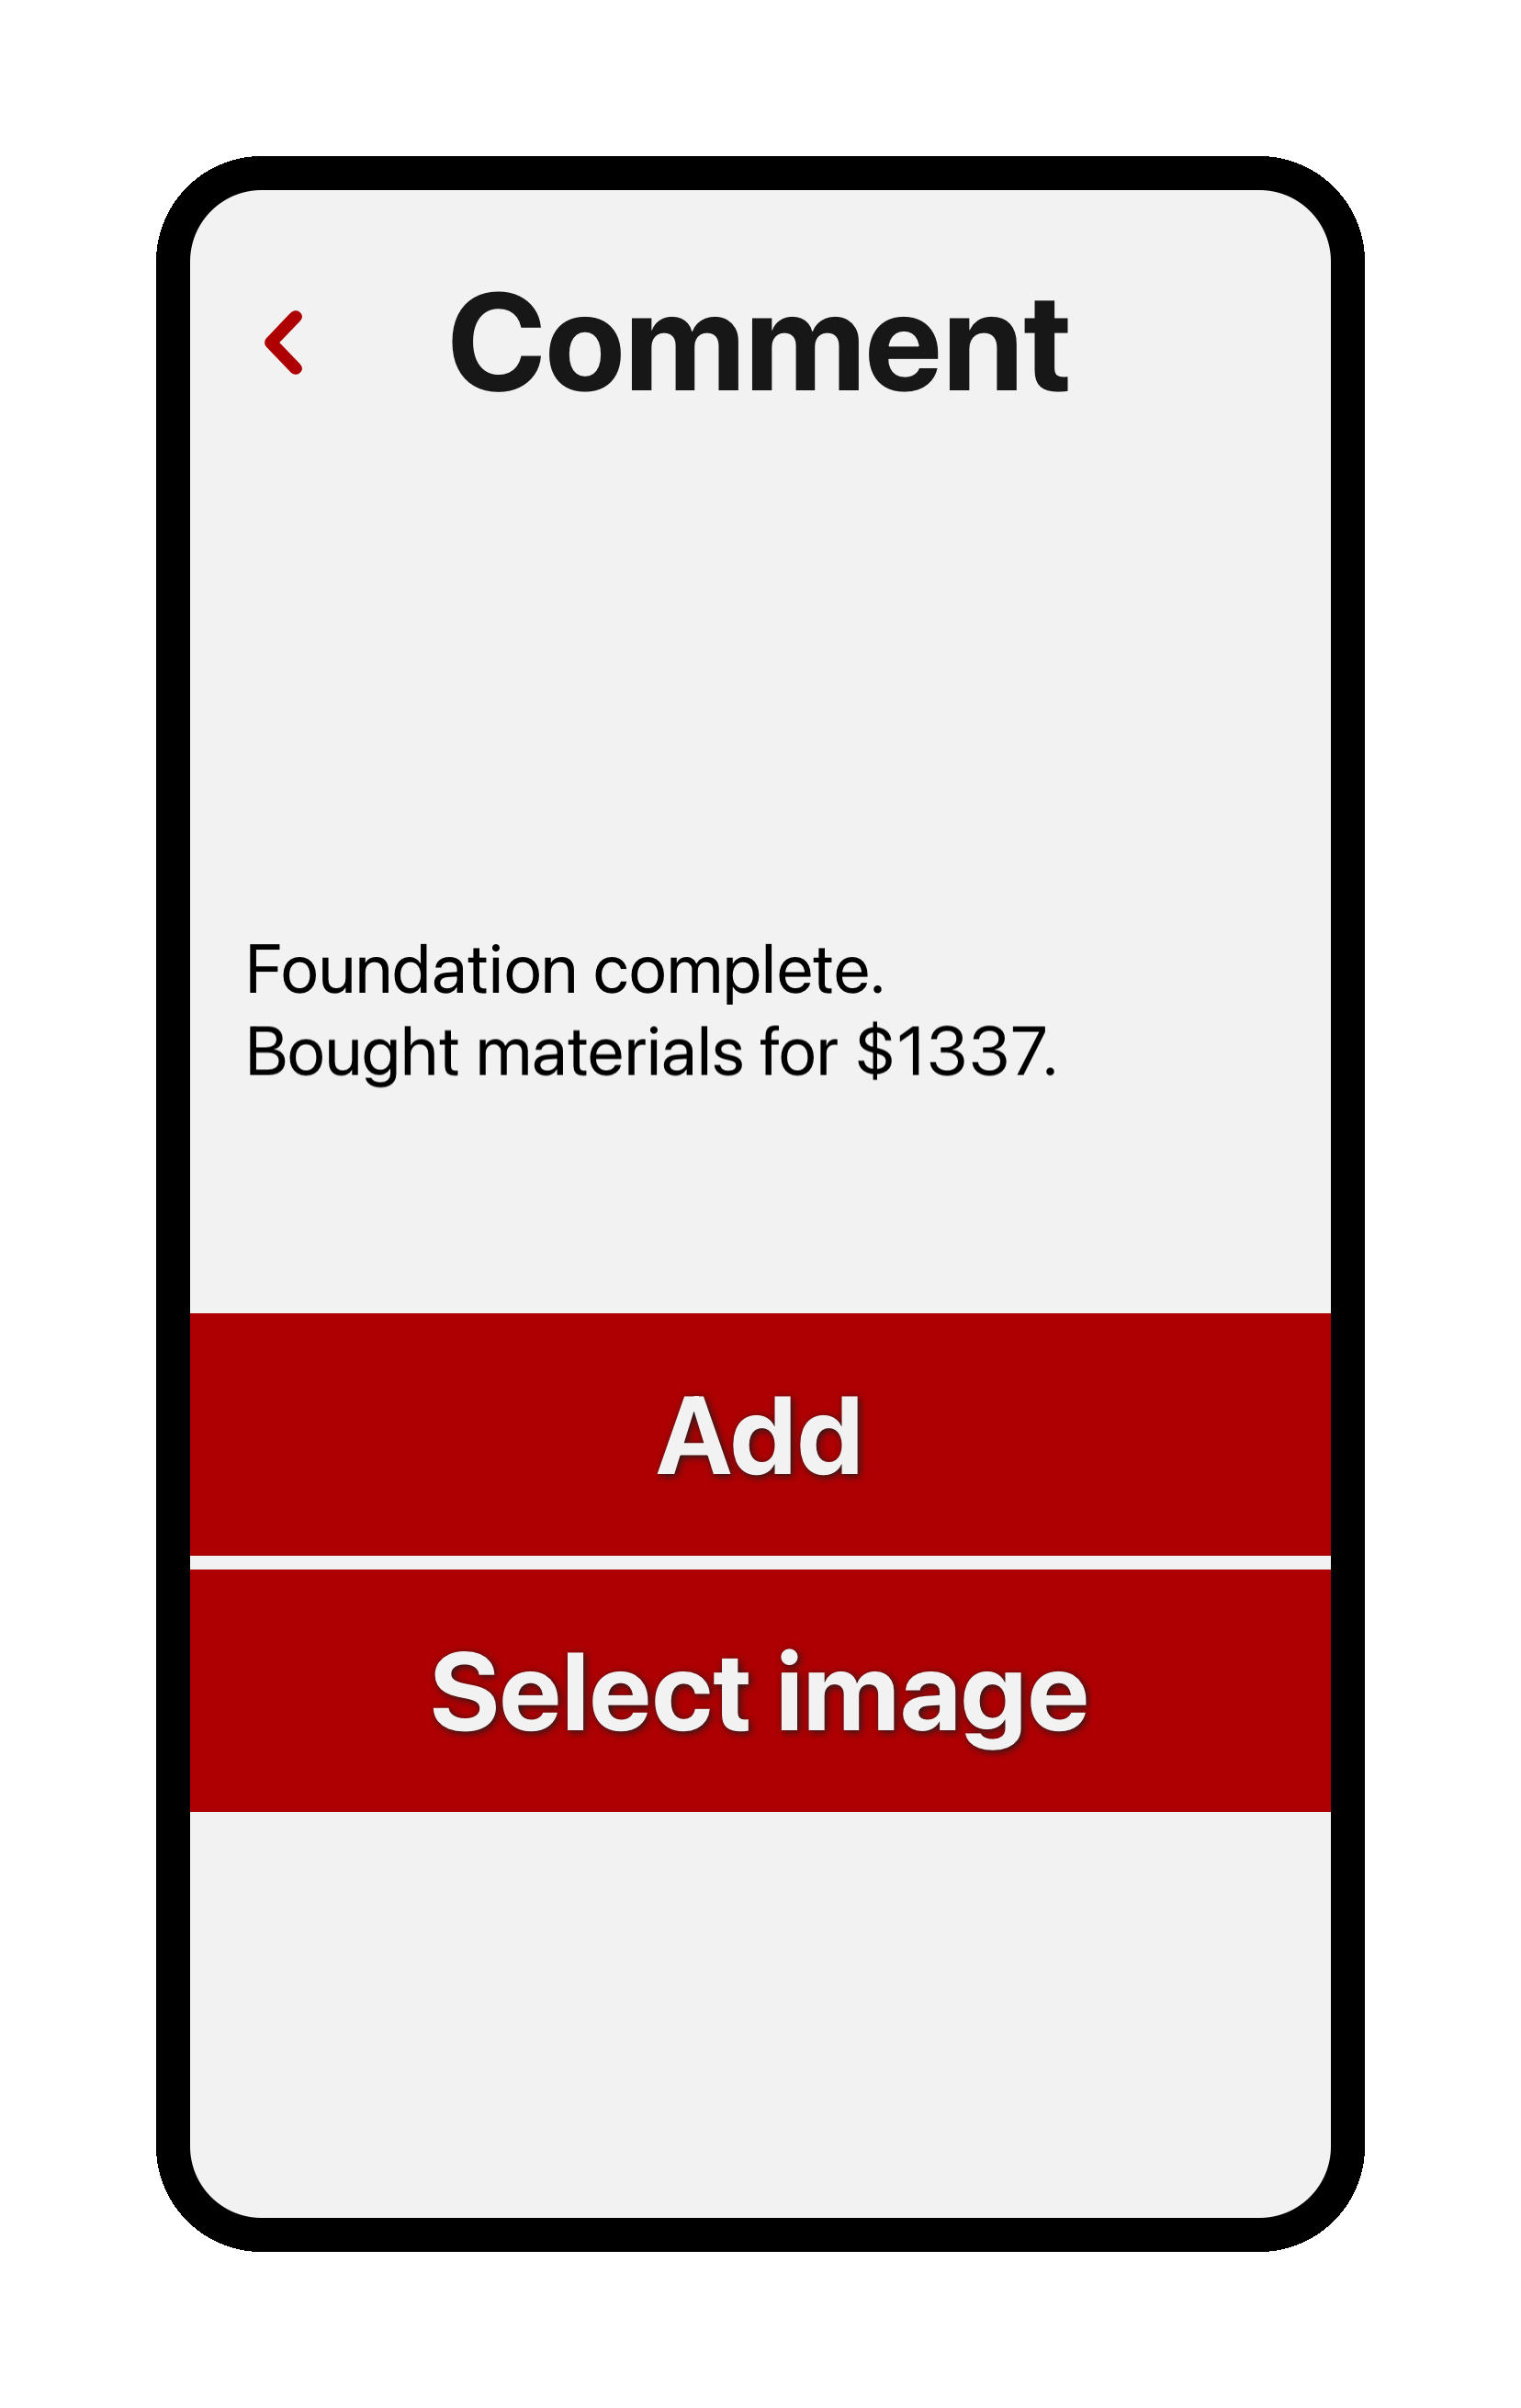 Screenshot of adding a comment to a time entry in the Tímavera app. The comment being added to Project A is 'Foundation complete. Bought materials worth $1337'.